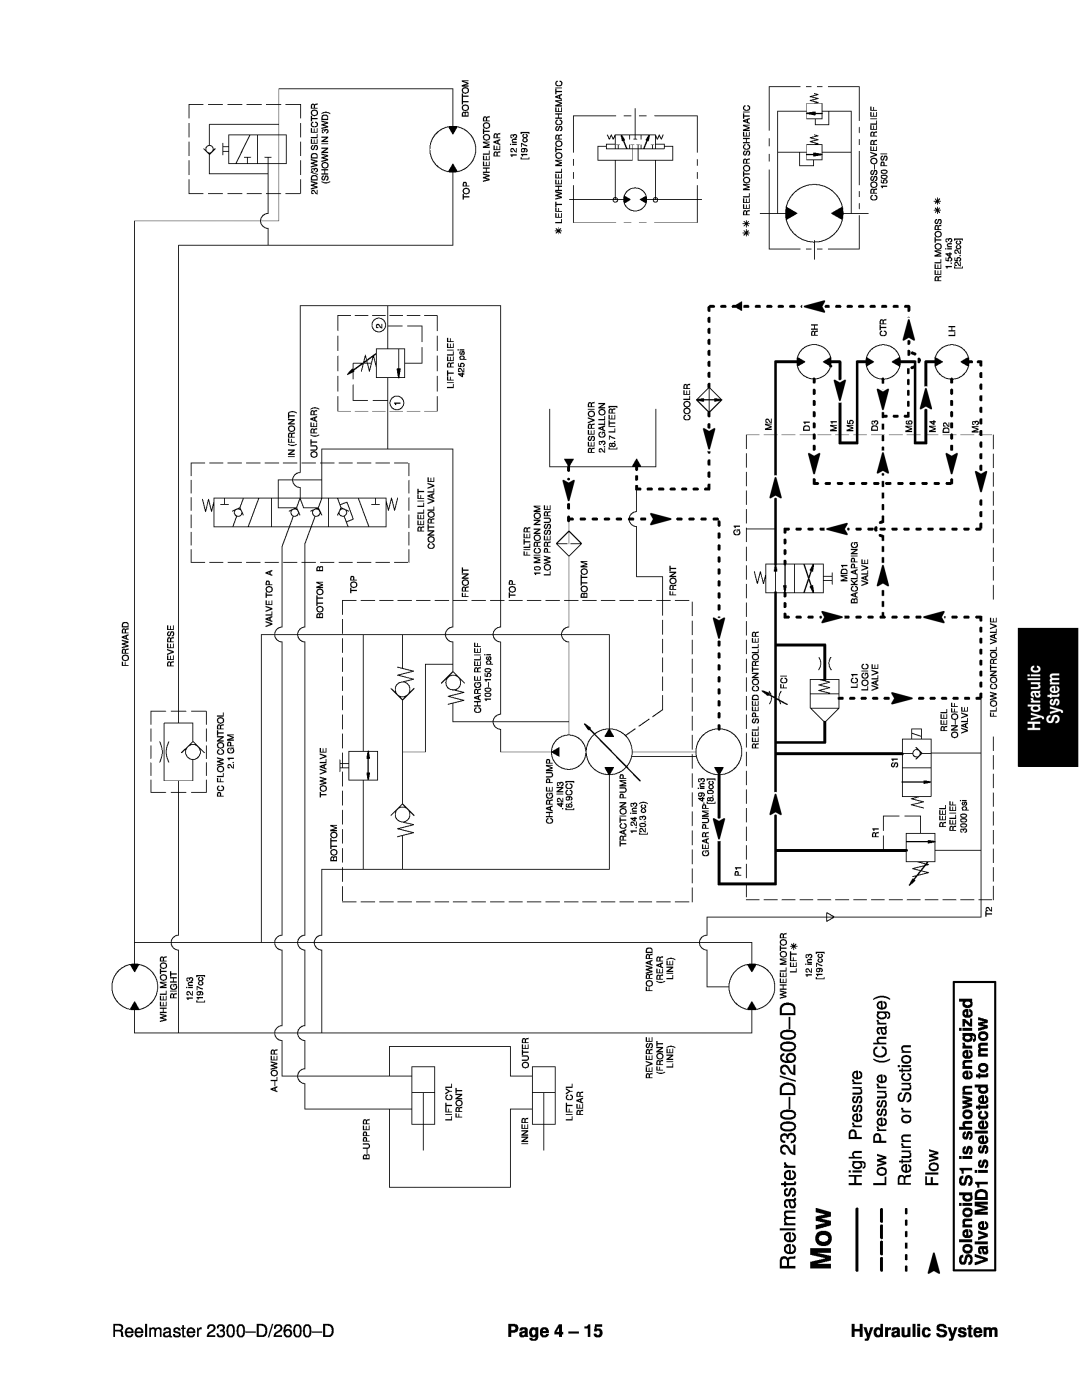 Toro 2600D, 2300-D service manual Reelmaster 2300±D/2600±D, Page 4 ± Hydraulic System, Solenoid S1 is shown energized 